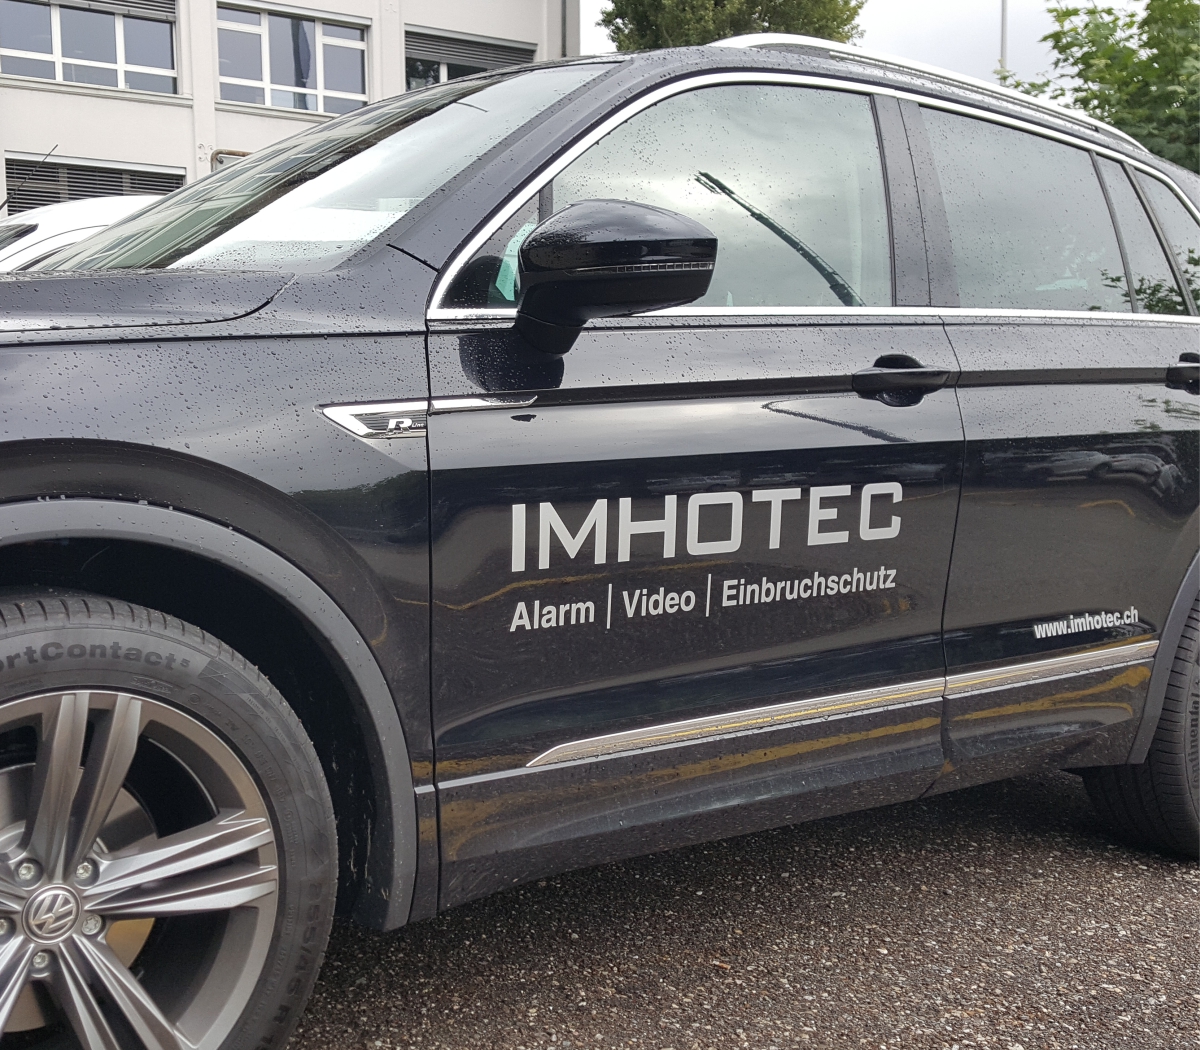 IMHOTEC ENGINEERING AGs